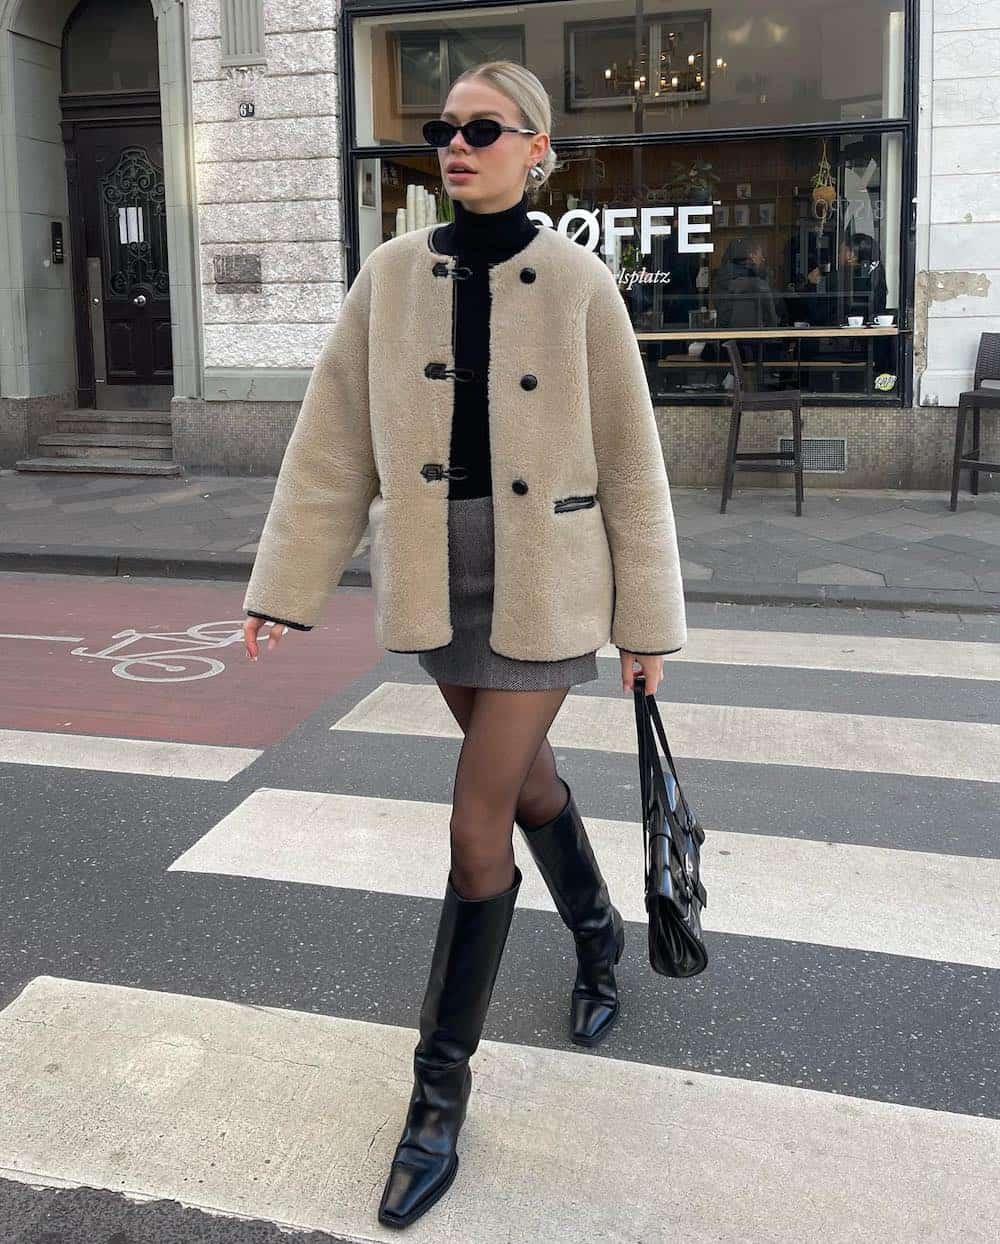 Woman wearing tall black boots, black tights, a grey mini skirt and a black turtleneck with a cream colored sherpa coat.